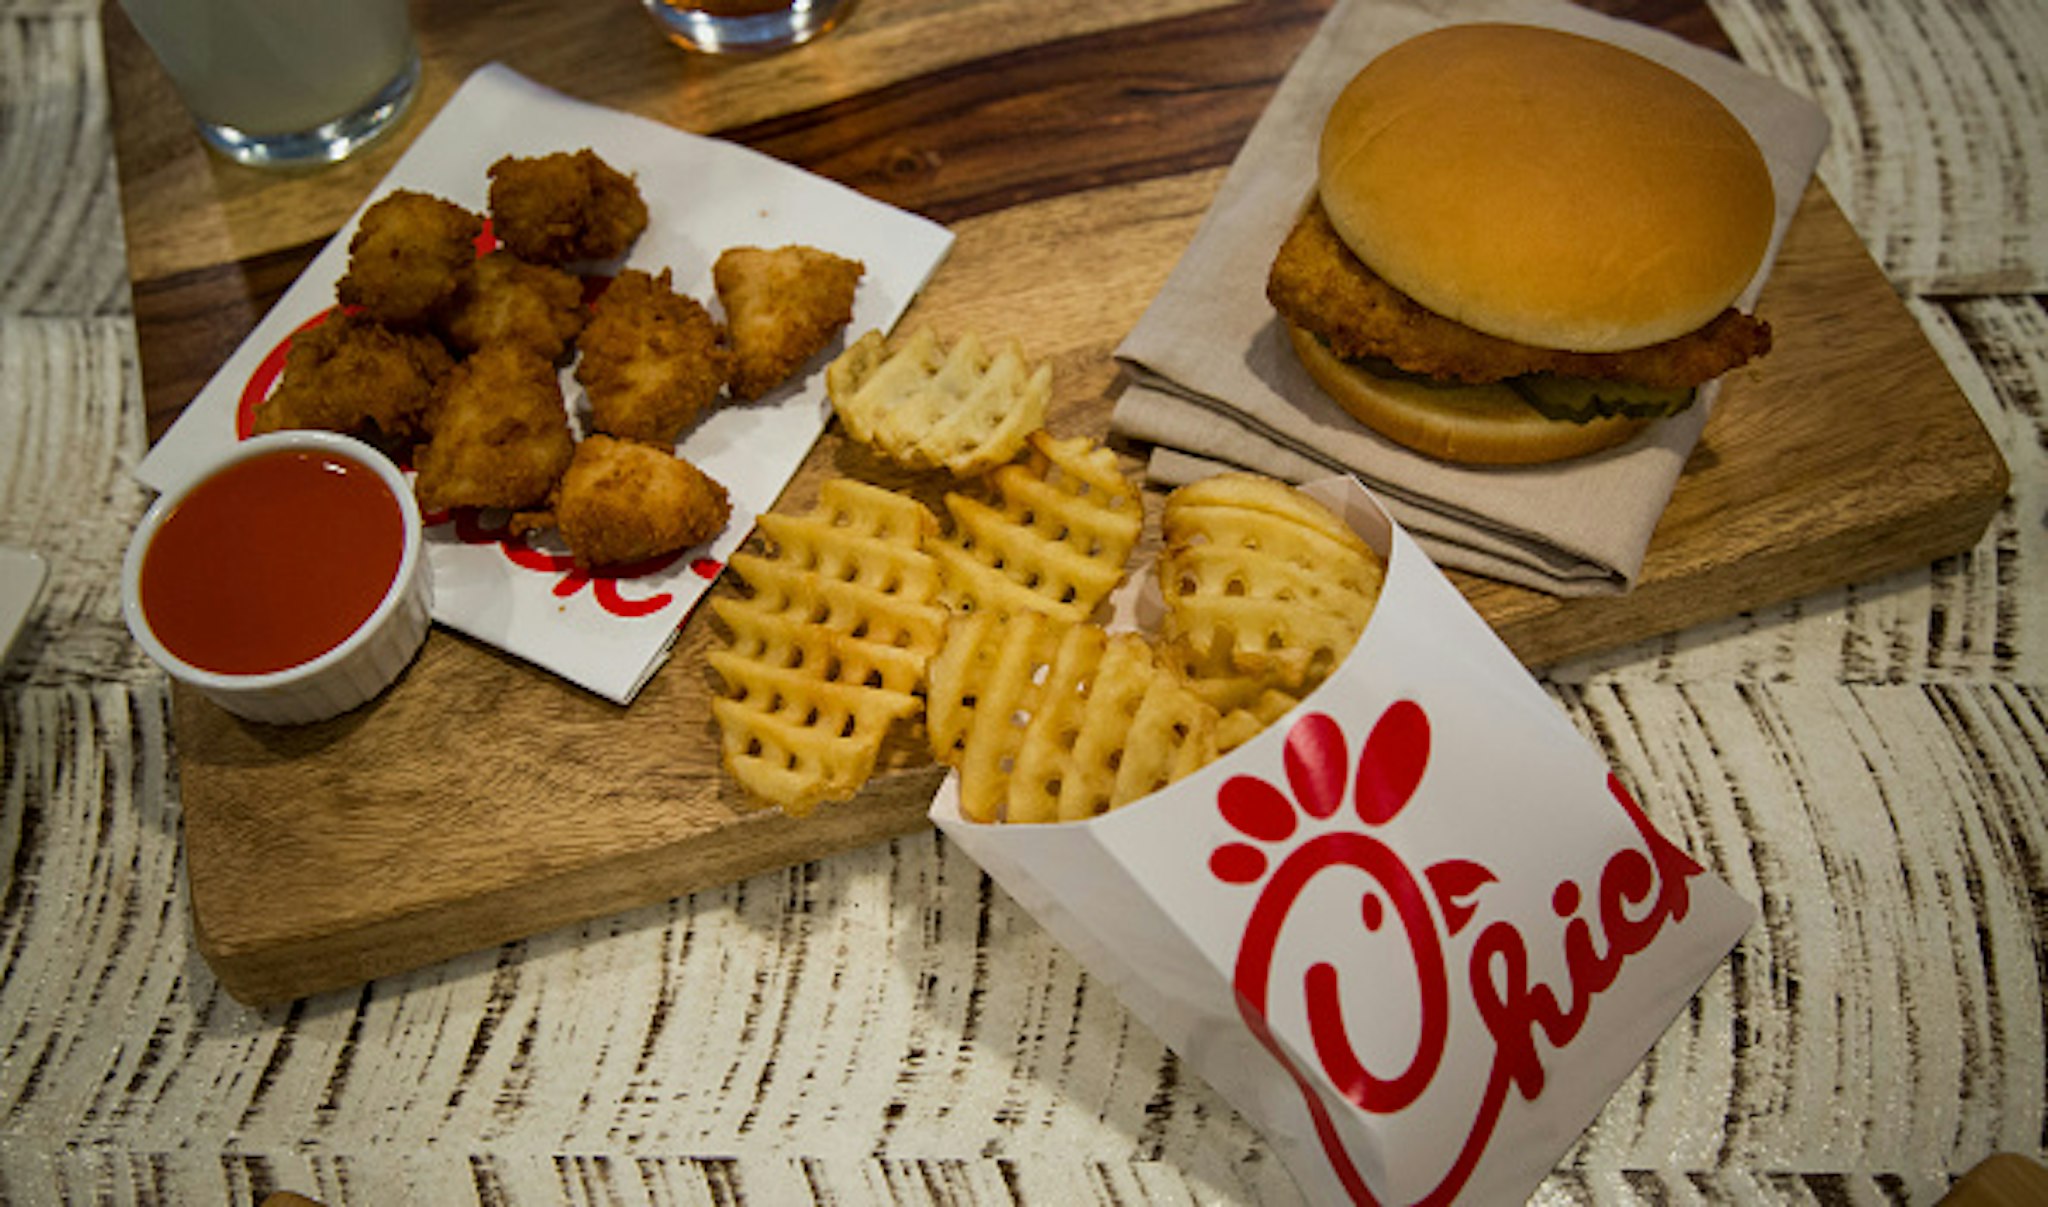 Chicken nuggets, french fries, and a fried chicken sandwich are arranged for a photograph during an event ahead of the grand opening for a Chick-fil-A restaurant in New York, U.S., on Friday, Oct. 2, 2015. Chick-fil-A, the Southern chicken-sandwich chain that has drawn both controversy and copycats over the years, has finally arrived in New York. The company will open a 5,000-square-foot (465-square-meter), three-level restaurant in Manhattan's Garment District that will be the chain's largest location in the nation.